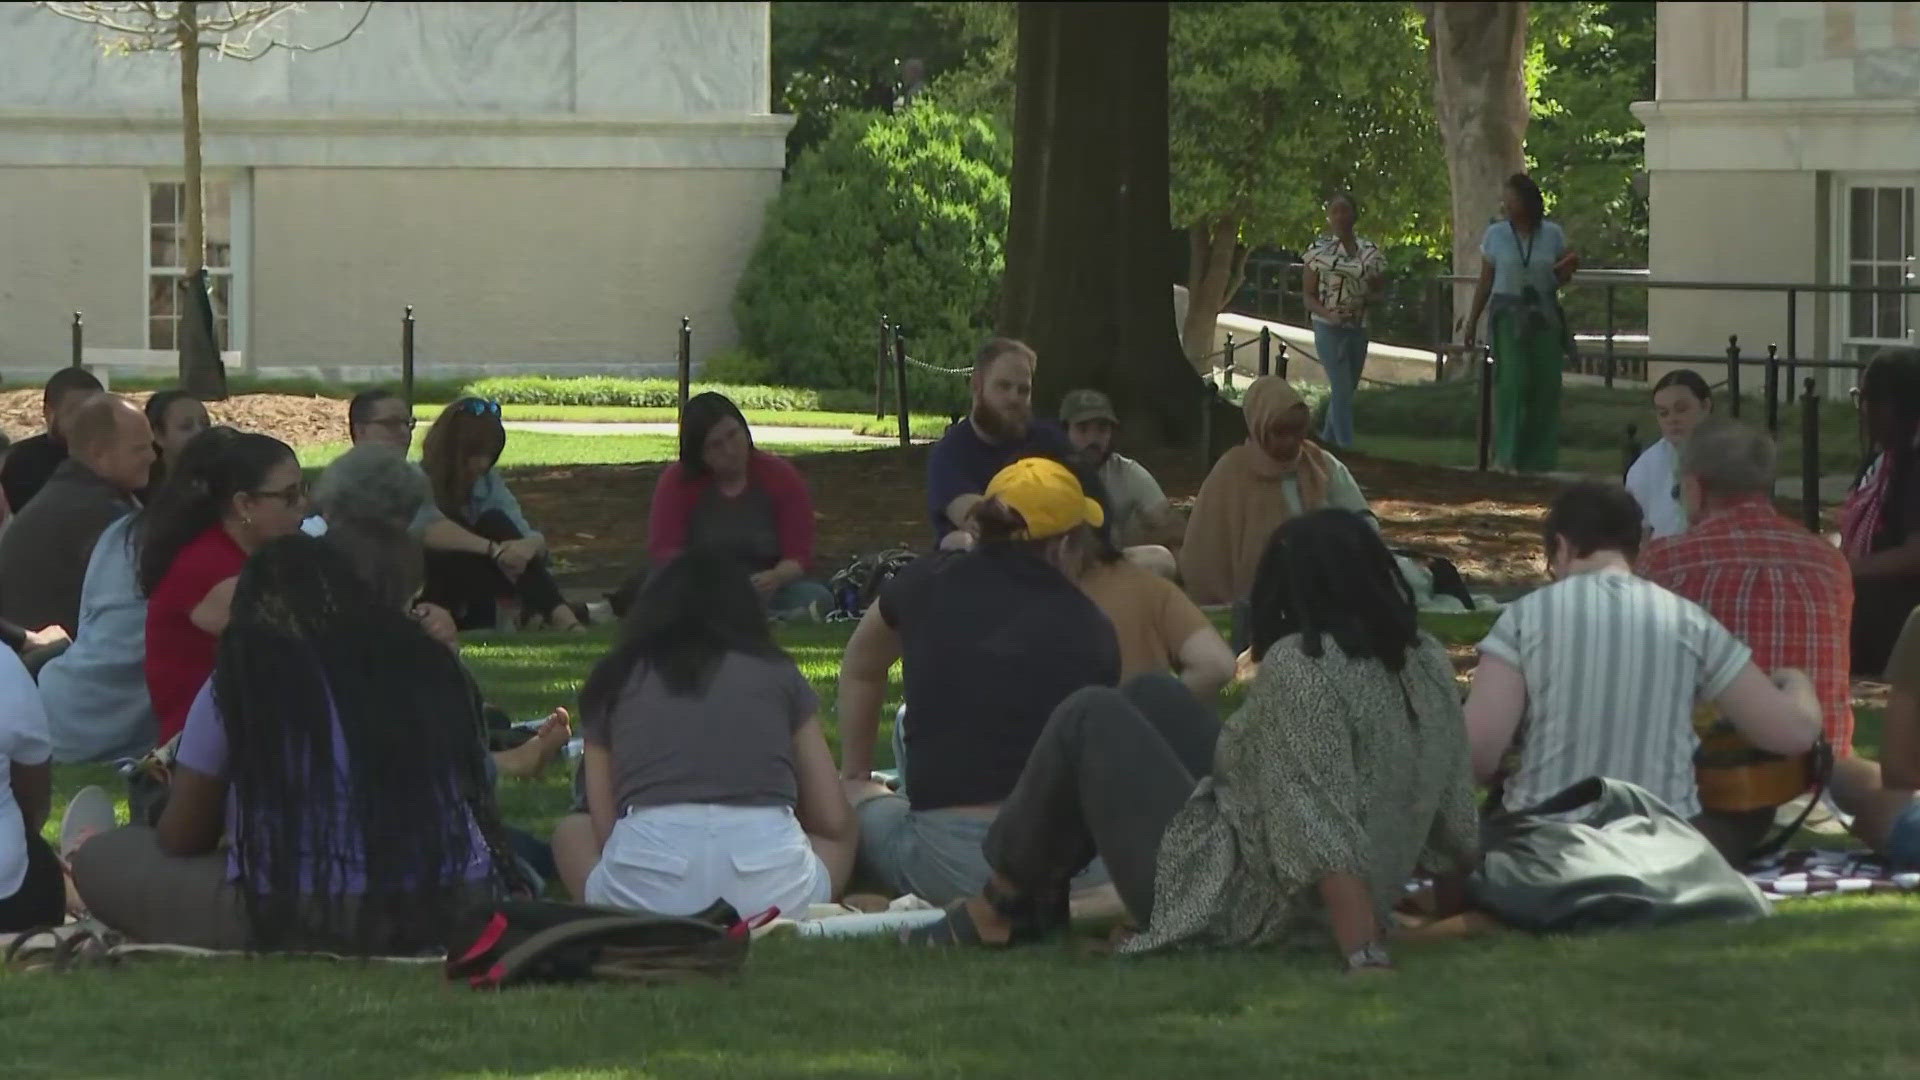 The prayer vigil comes a week after protests began on Emory's campus.